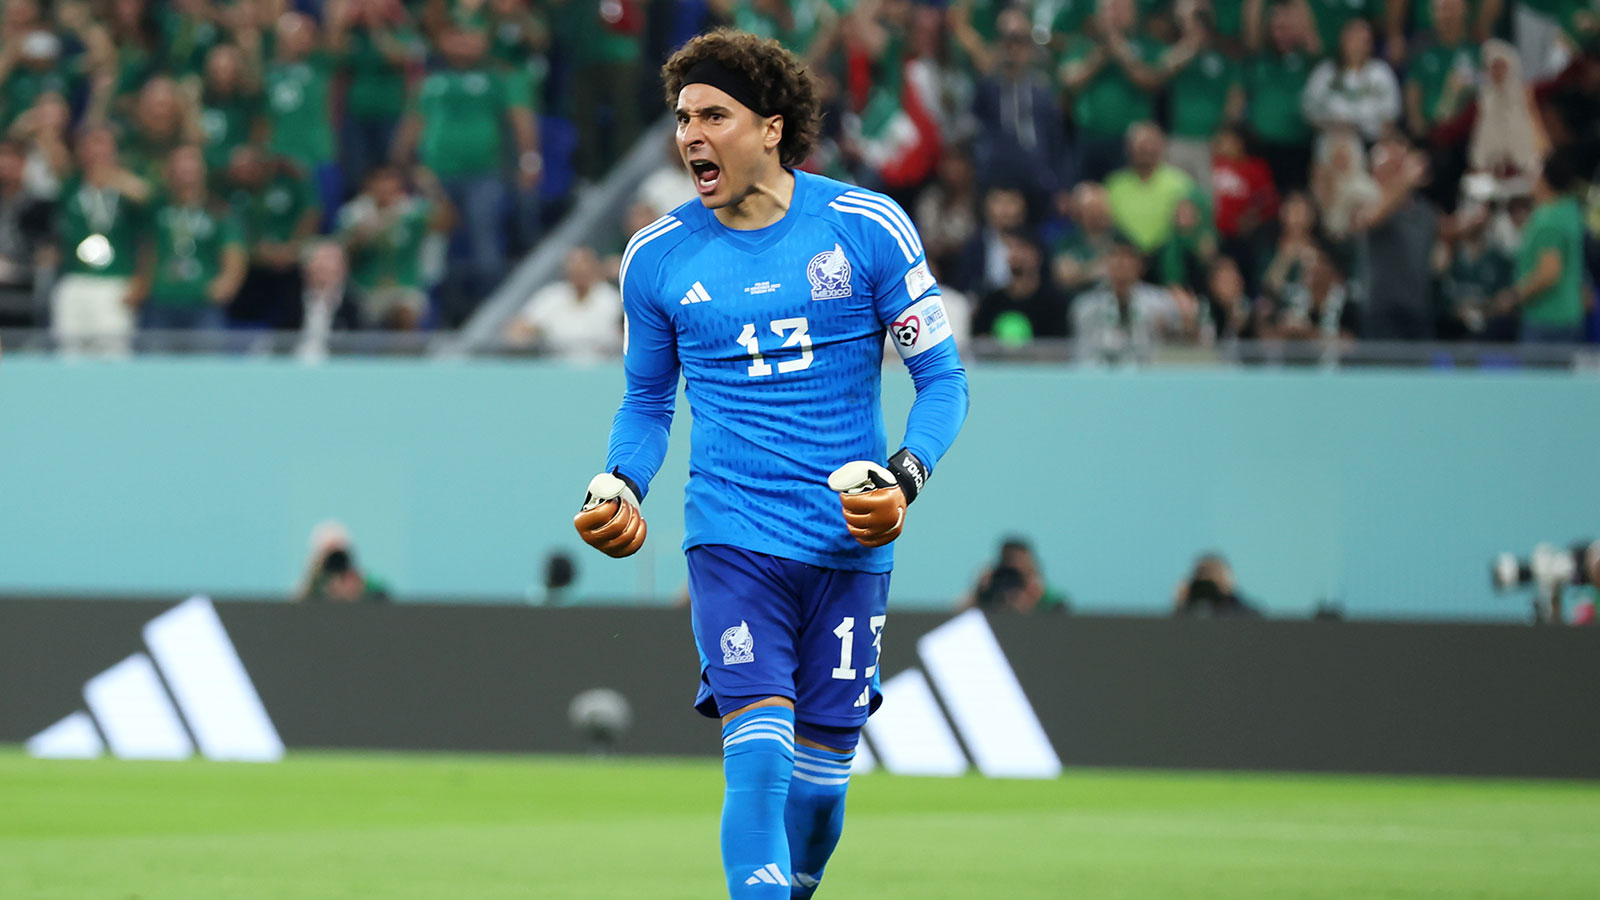 Mexico's Guillermo Ochoa  reacts after saving a penalty shot during the match against Poland on November 22.